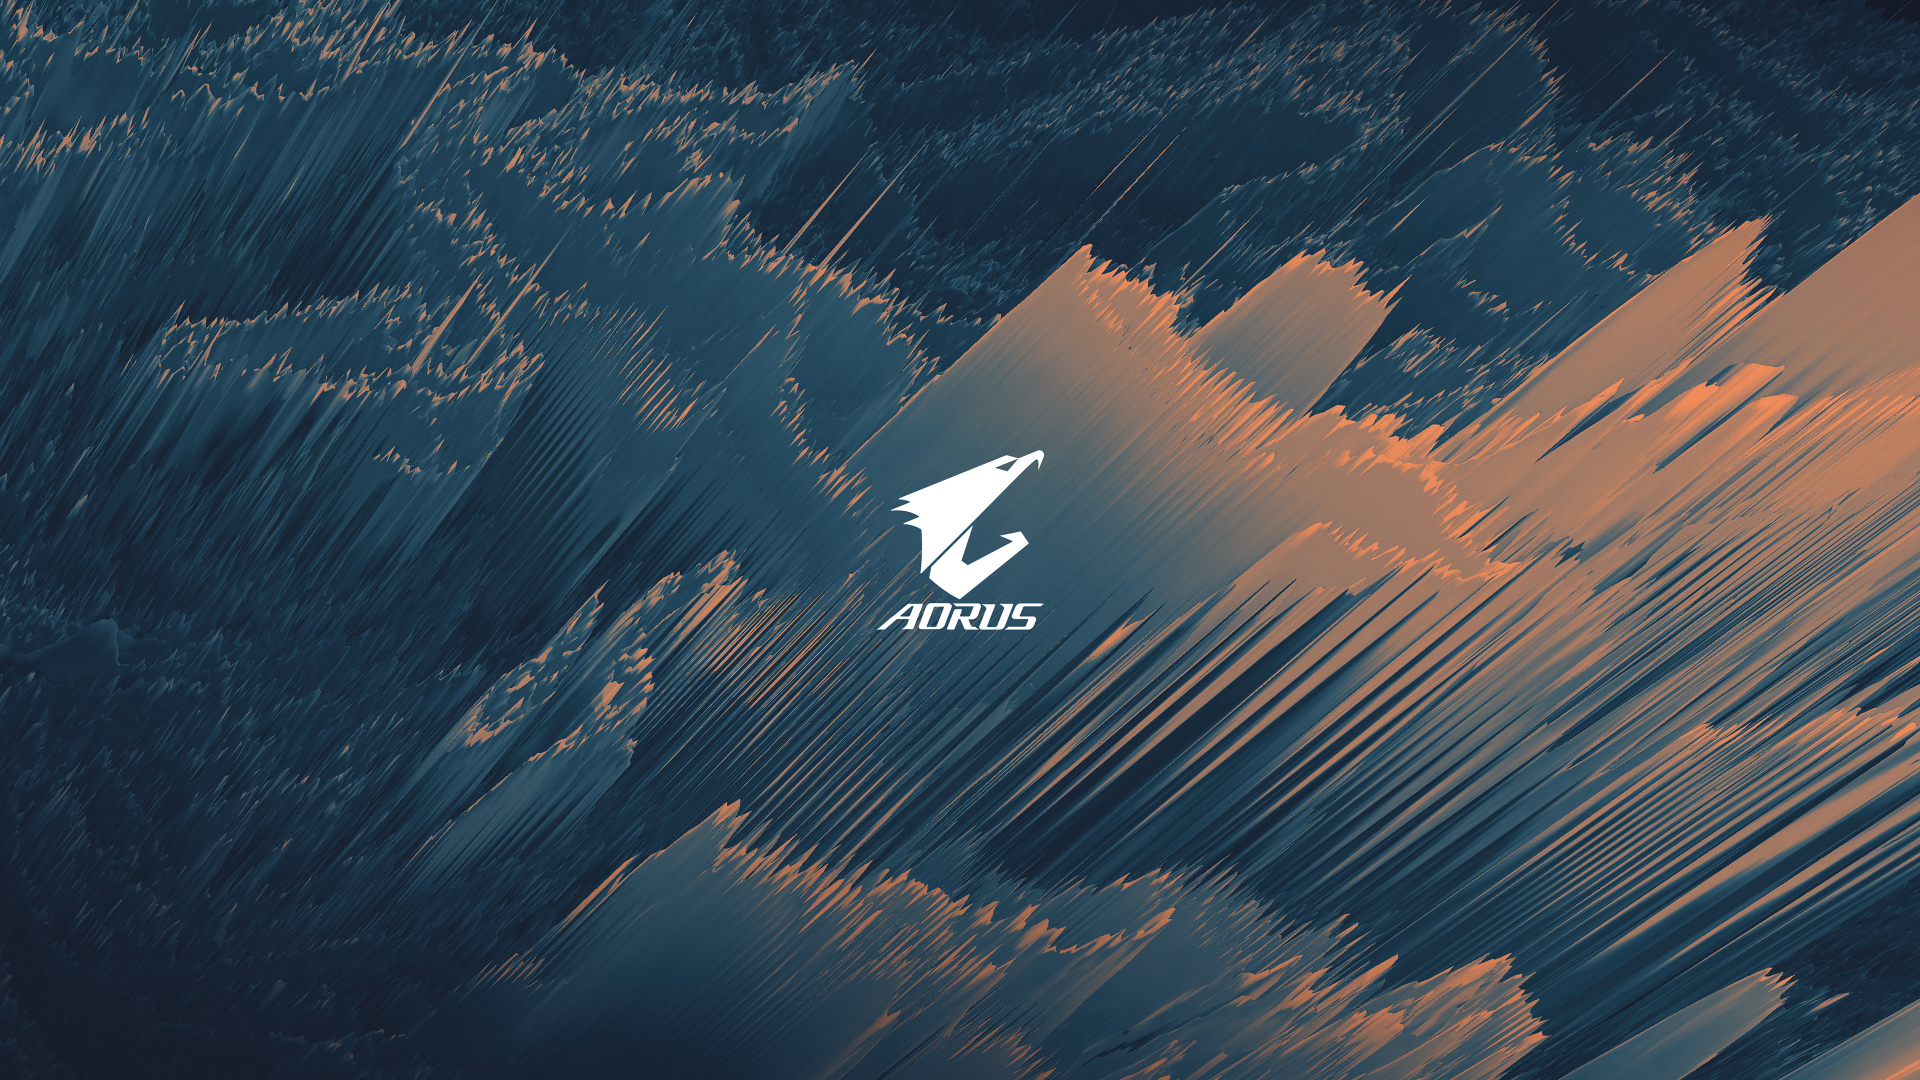 Wallpaper : Gigabyte, Aorus, logo, PC gaming, technology, simple background  3840x2160 - perry28 - 1399167 - HD Wallpapers - WallHere